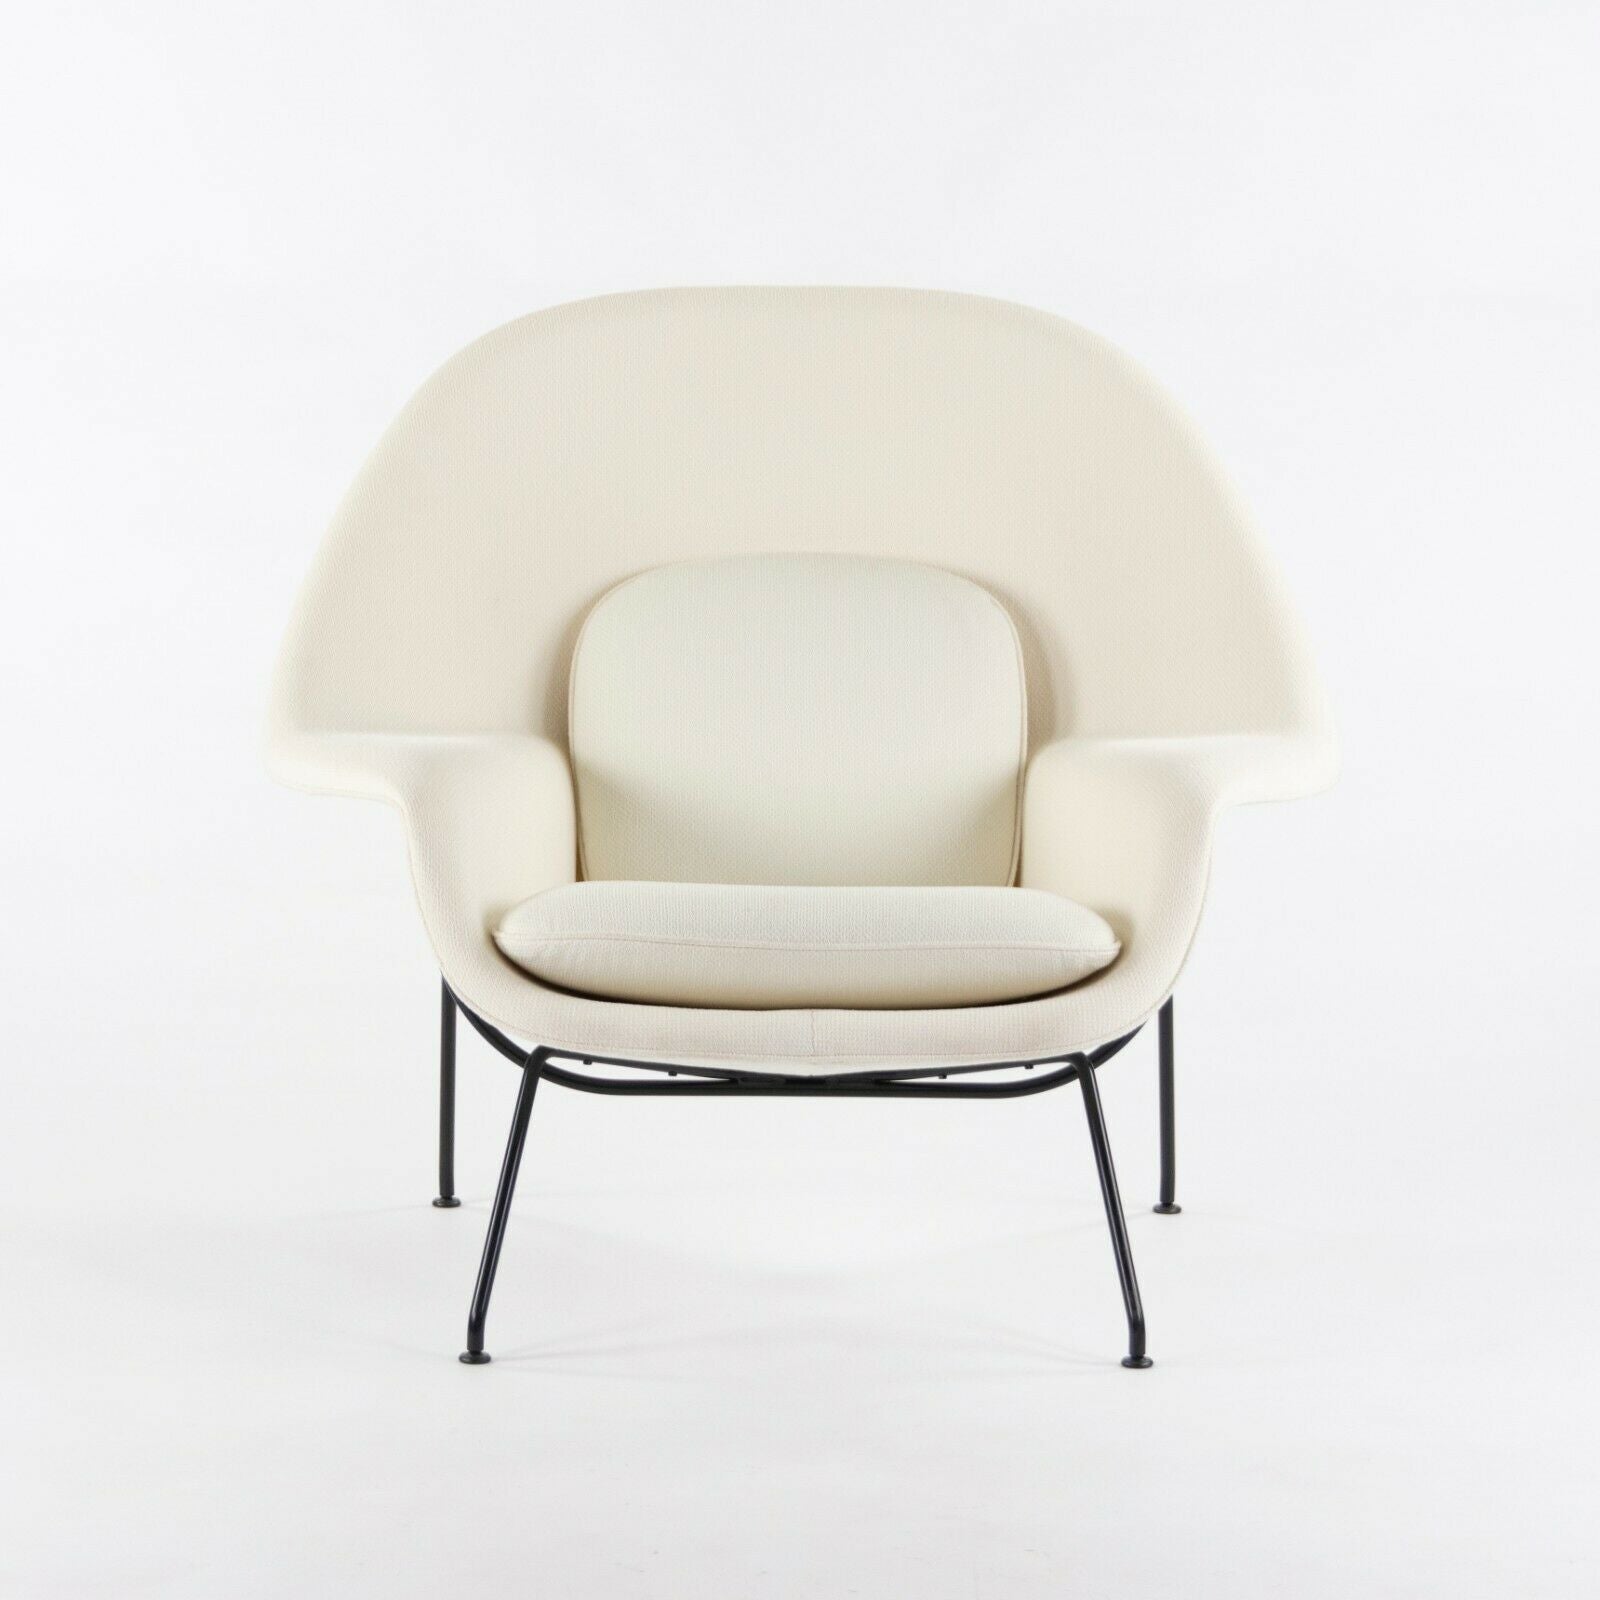 SOLD 2020 Eero Saarinen for Knoll Studio Womb Chair in White / Ivory Boucle Fabric